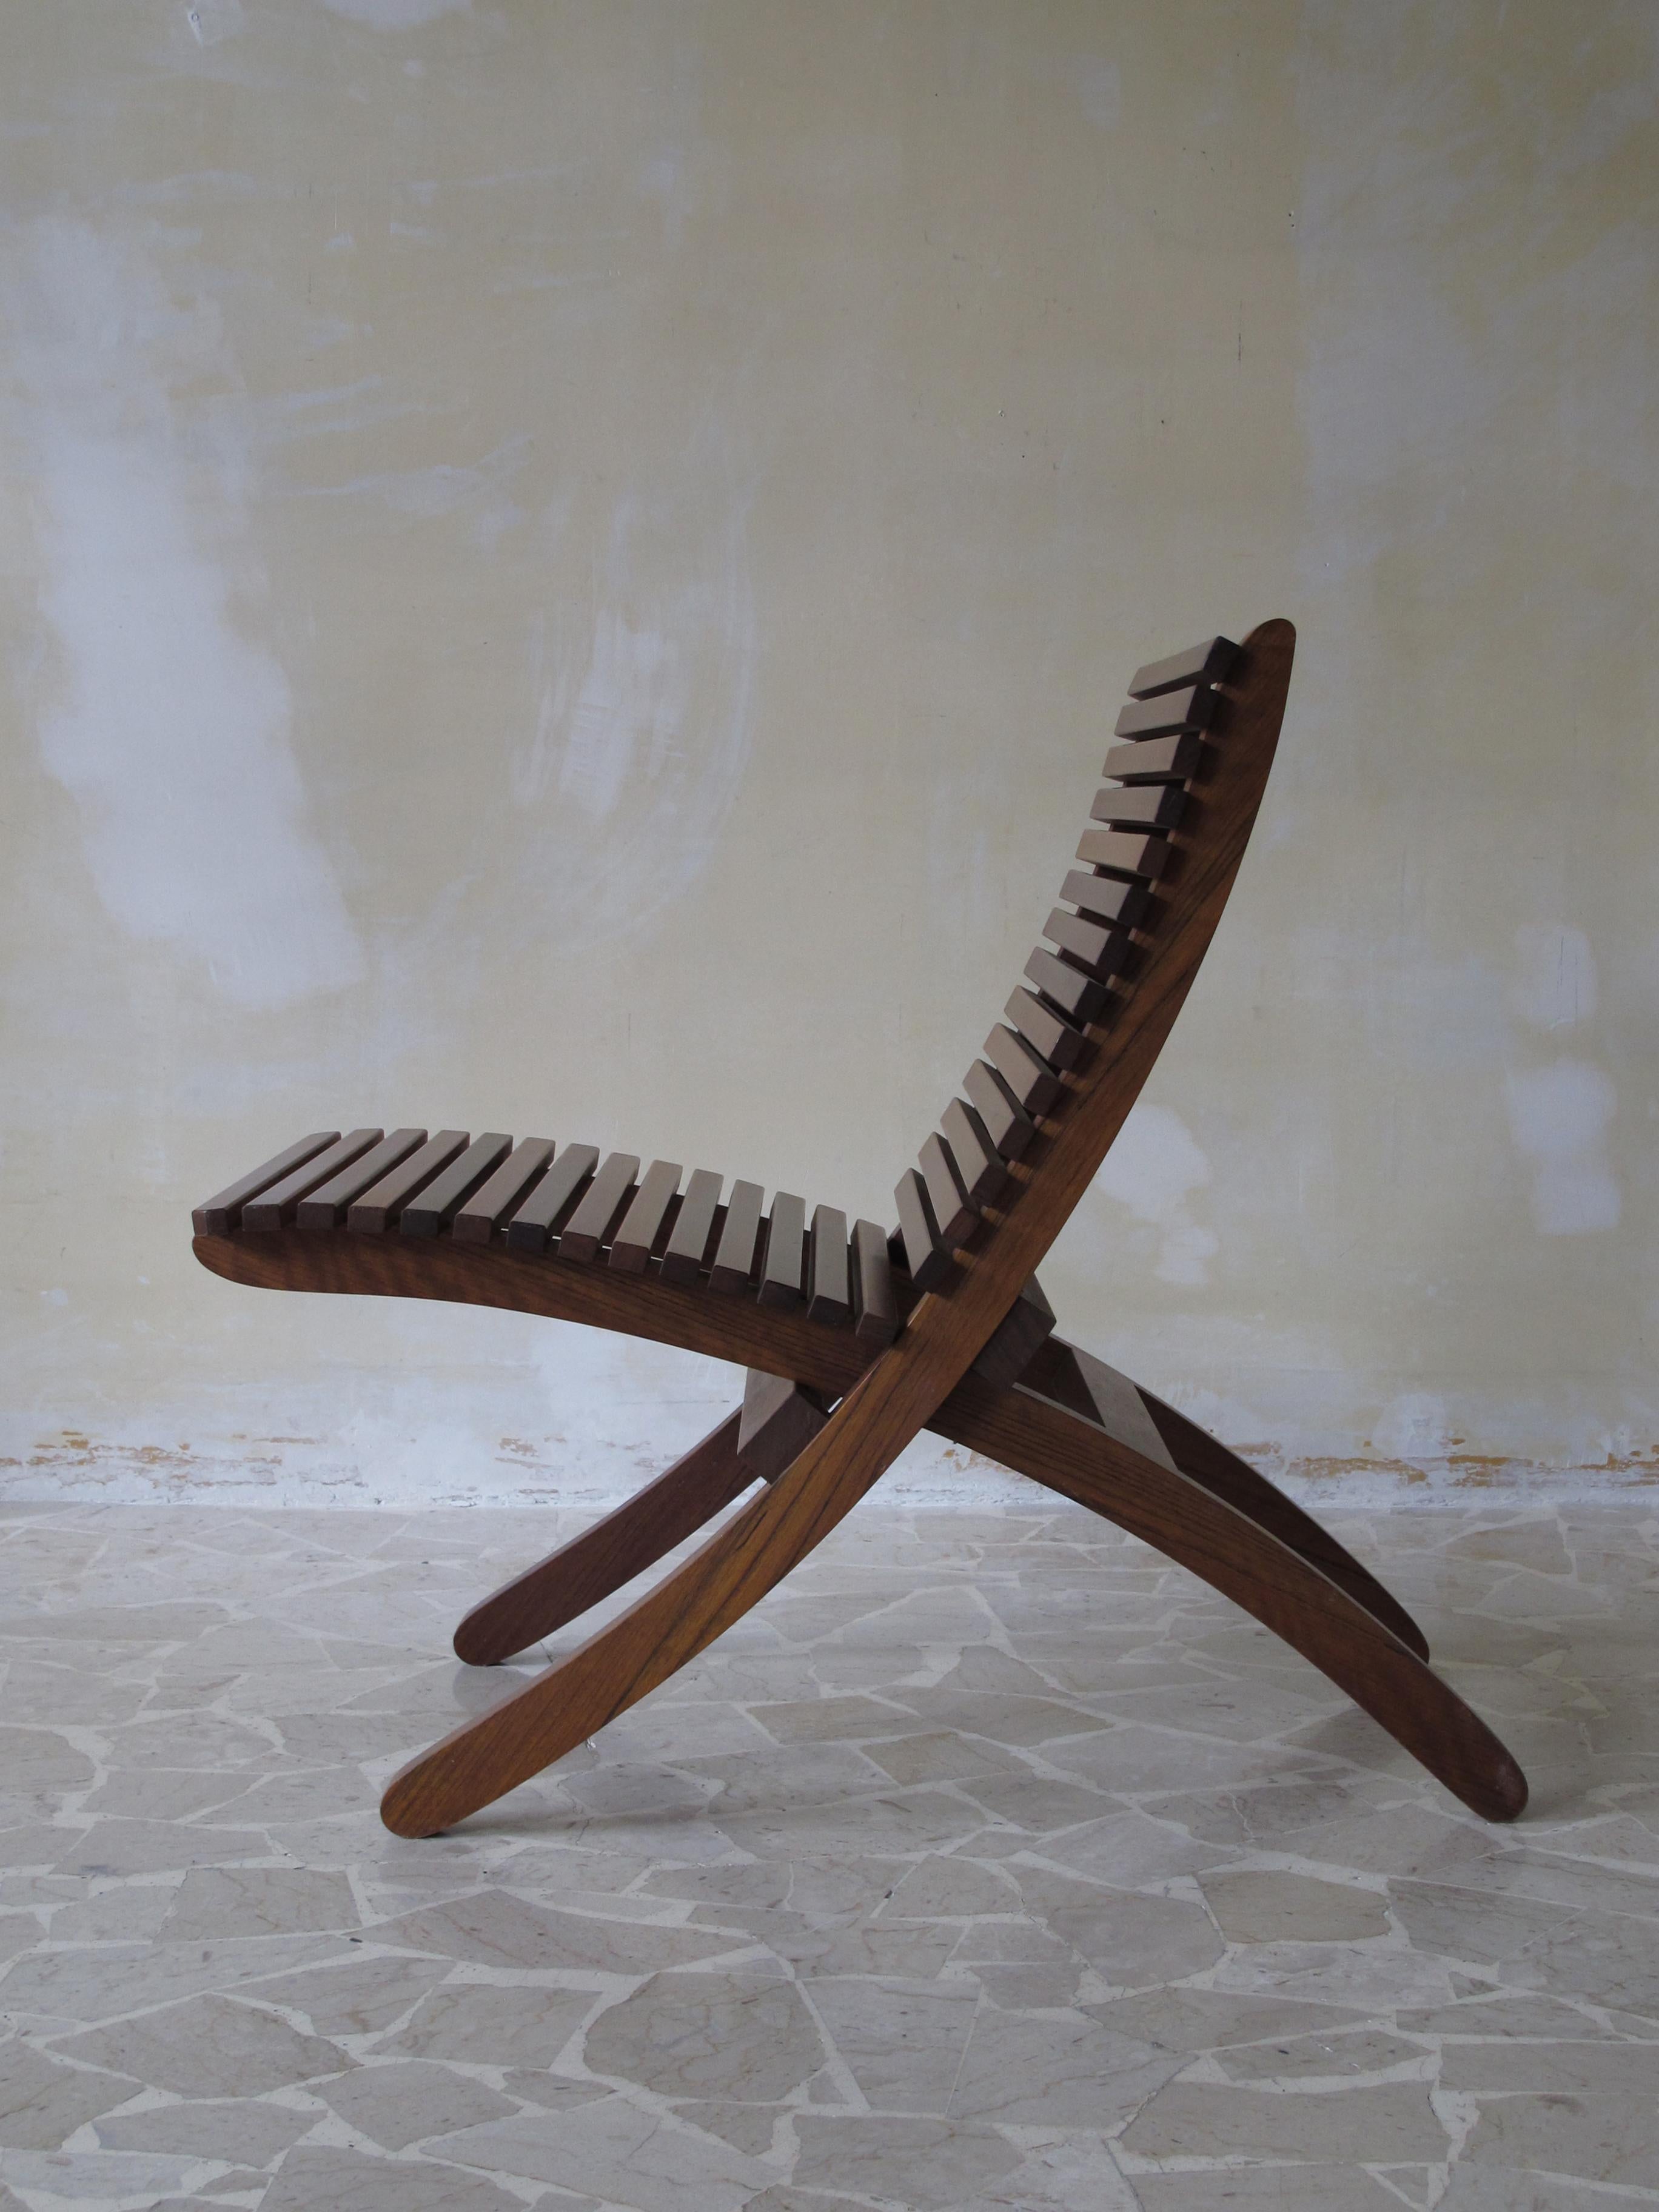 Italian chair or armchair in solid wood designed by Paolo Tilche,
the chair consists of two separable pieces, the chair is perfect for inside and outside, circa 1960s.